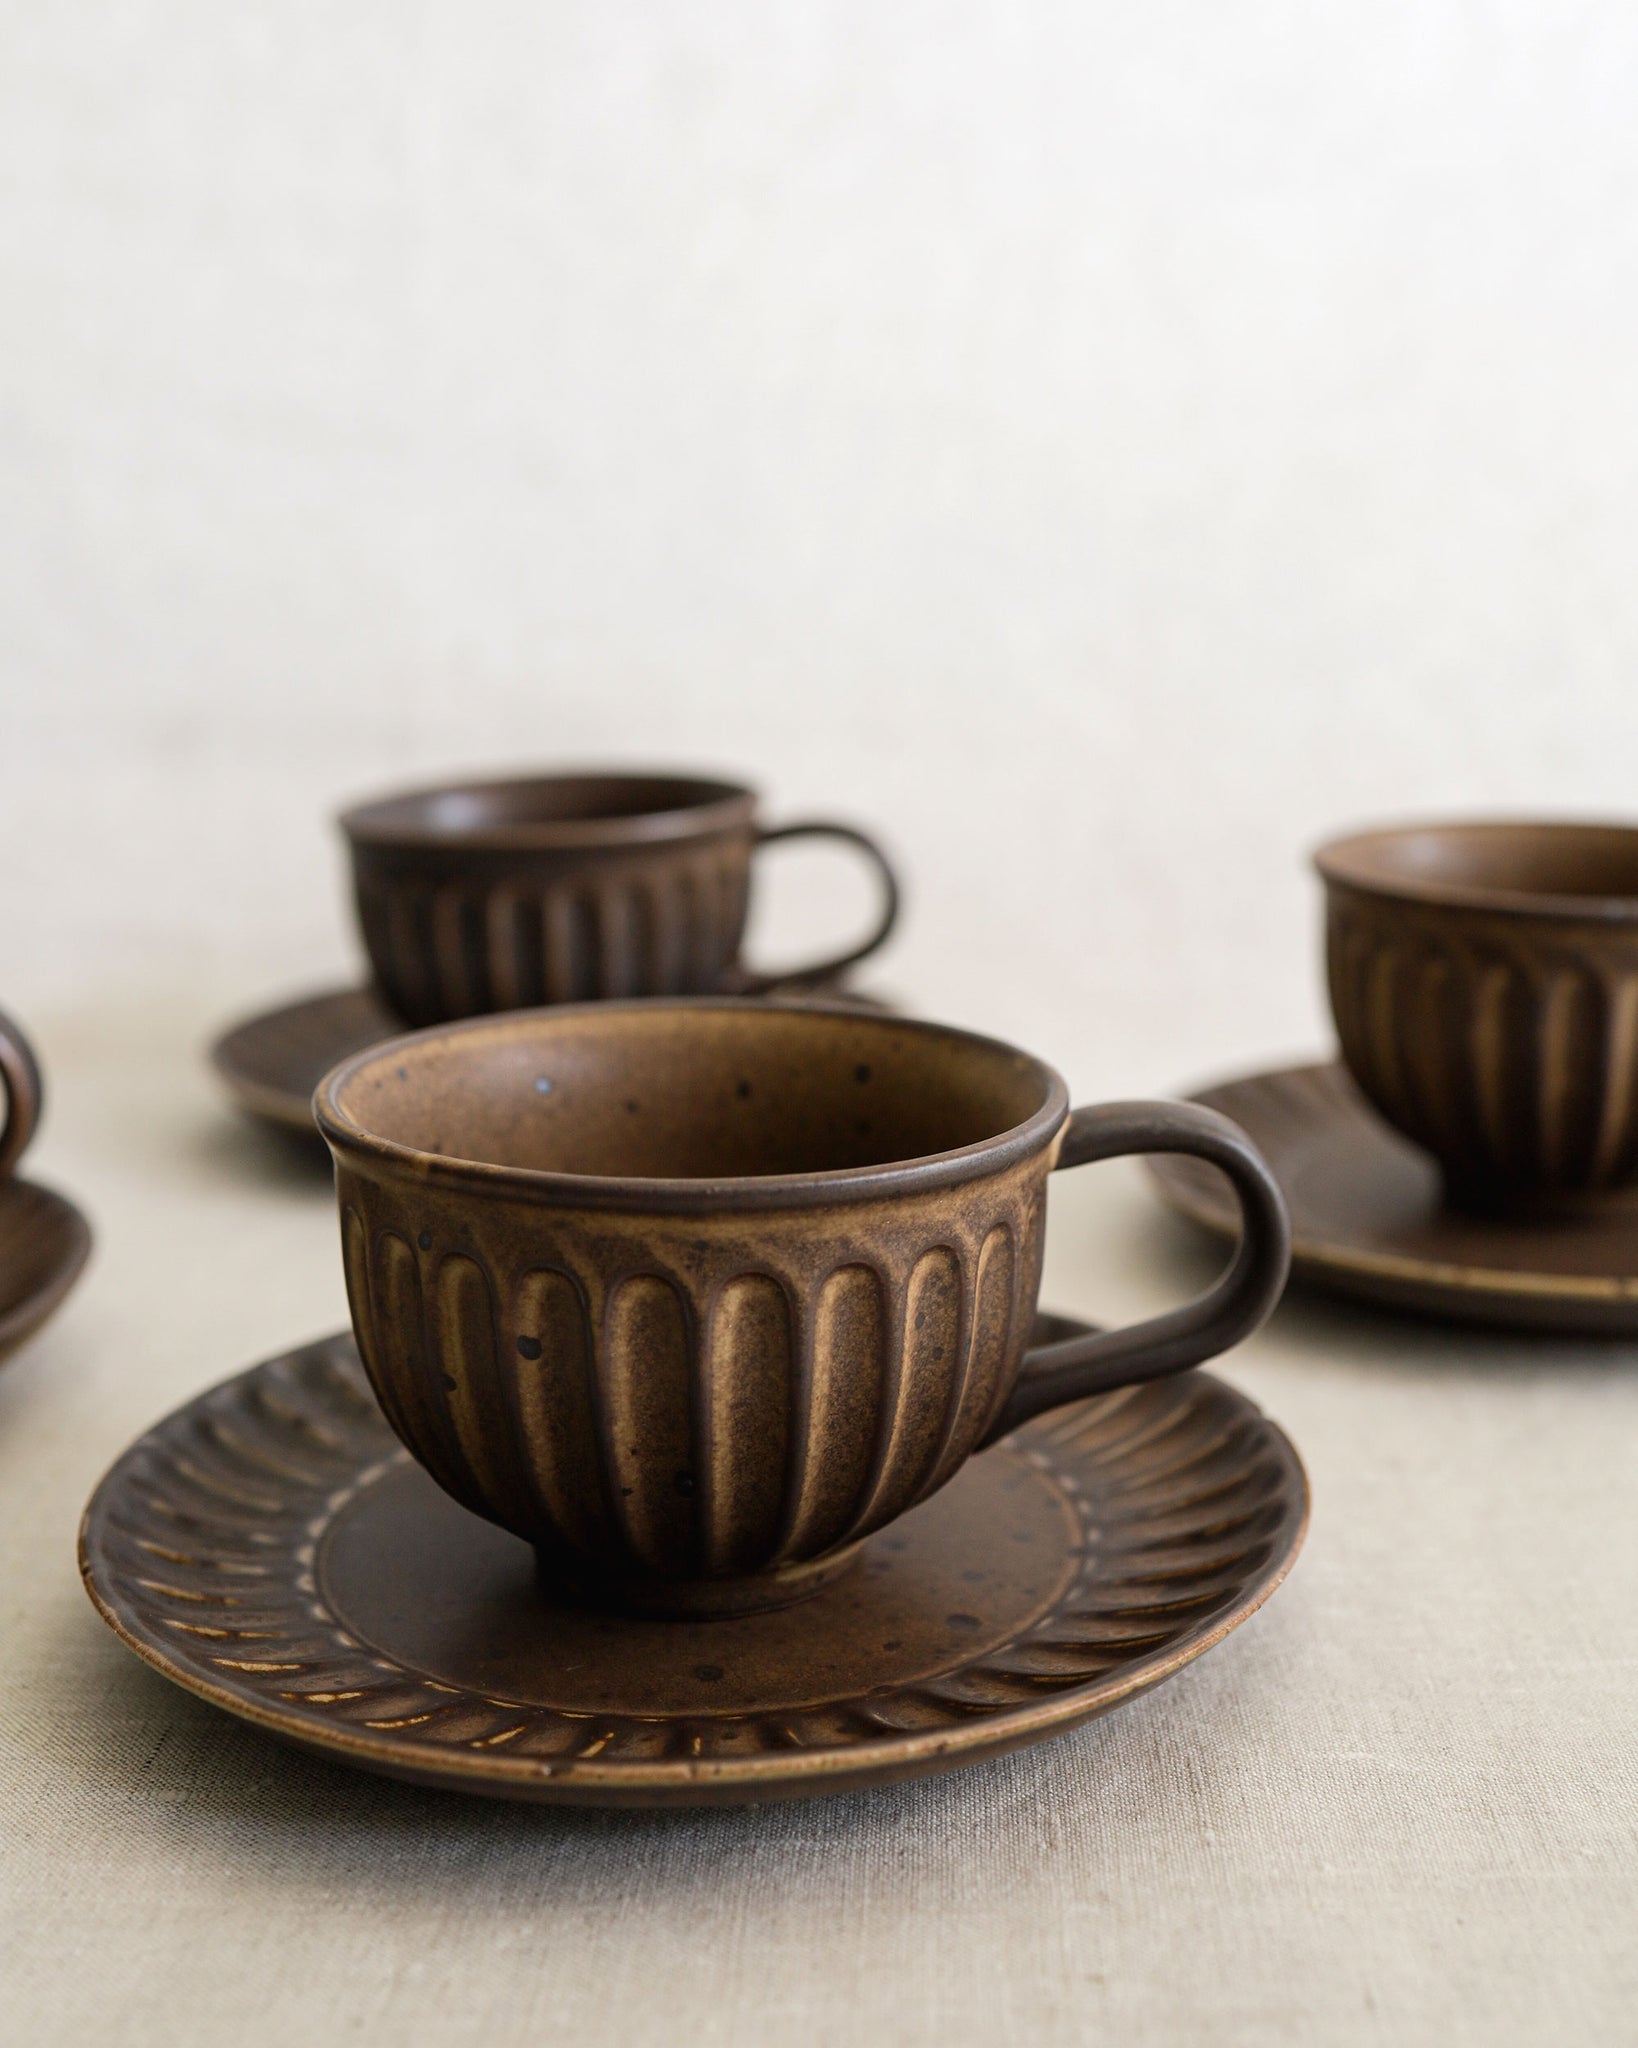 Ceramic Cup Of The Average Size, Brown Colour For Tea Or Coffee With A  Saucer. Stock Photo, Picture and Royalty Free Image. Image 7422972.